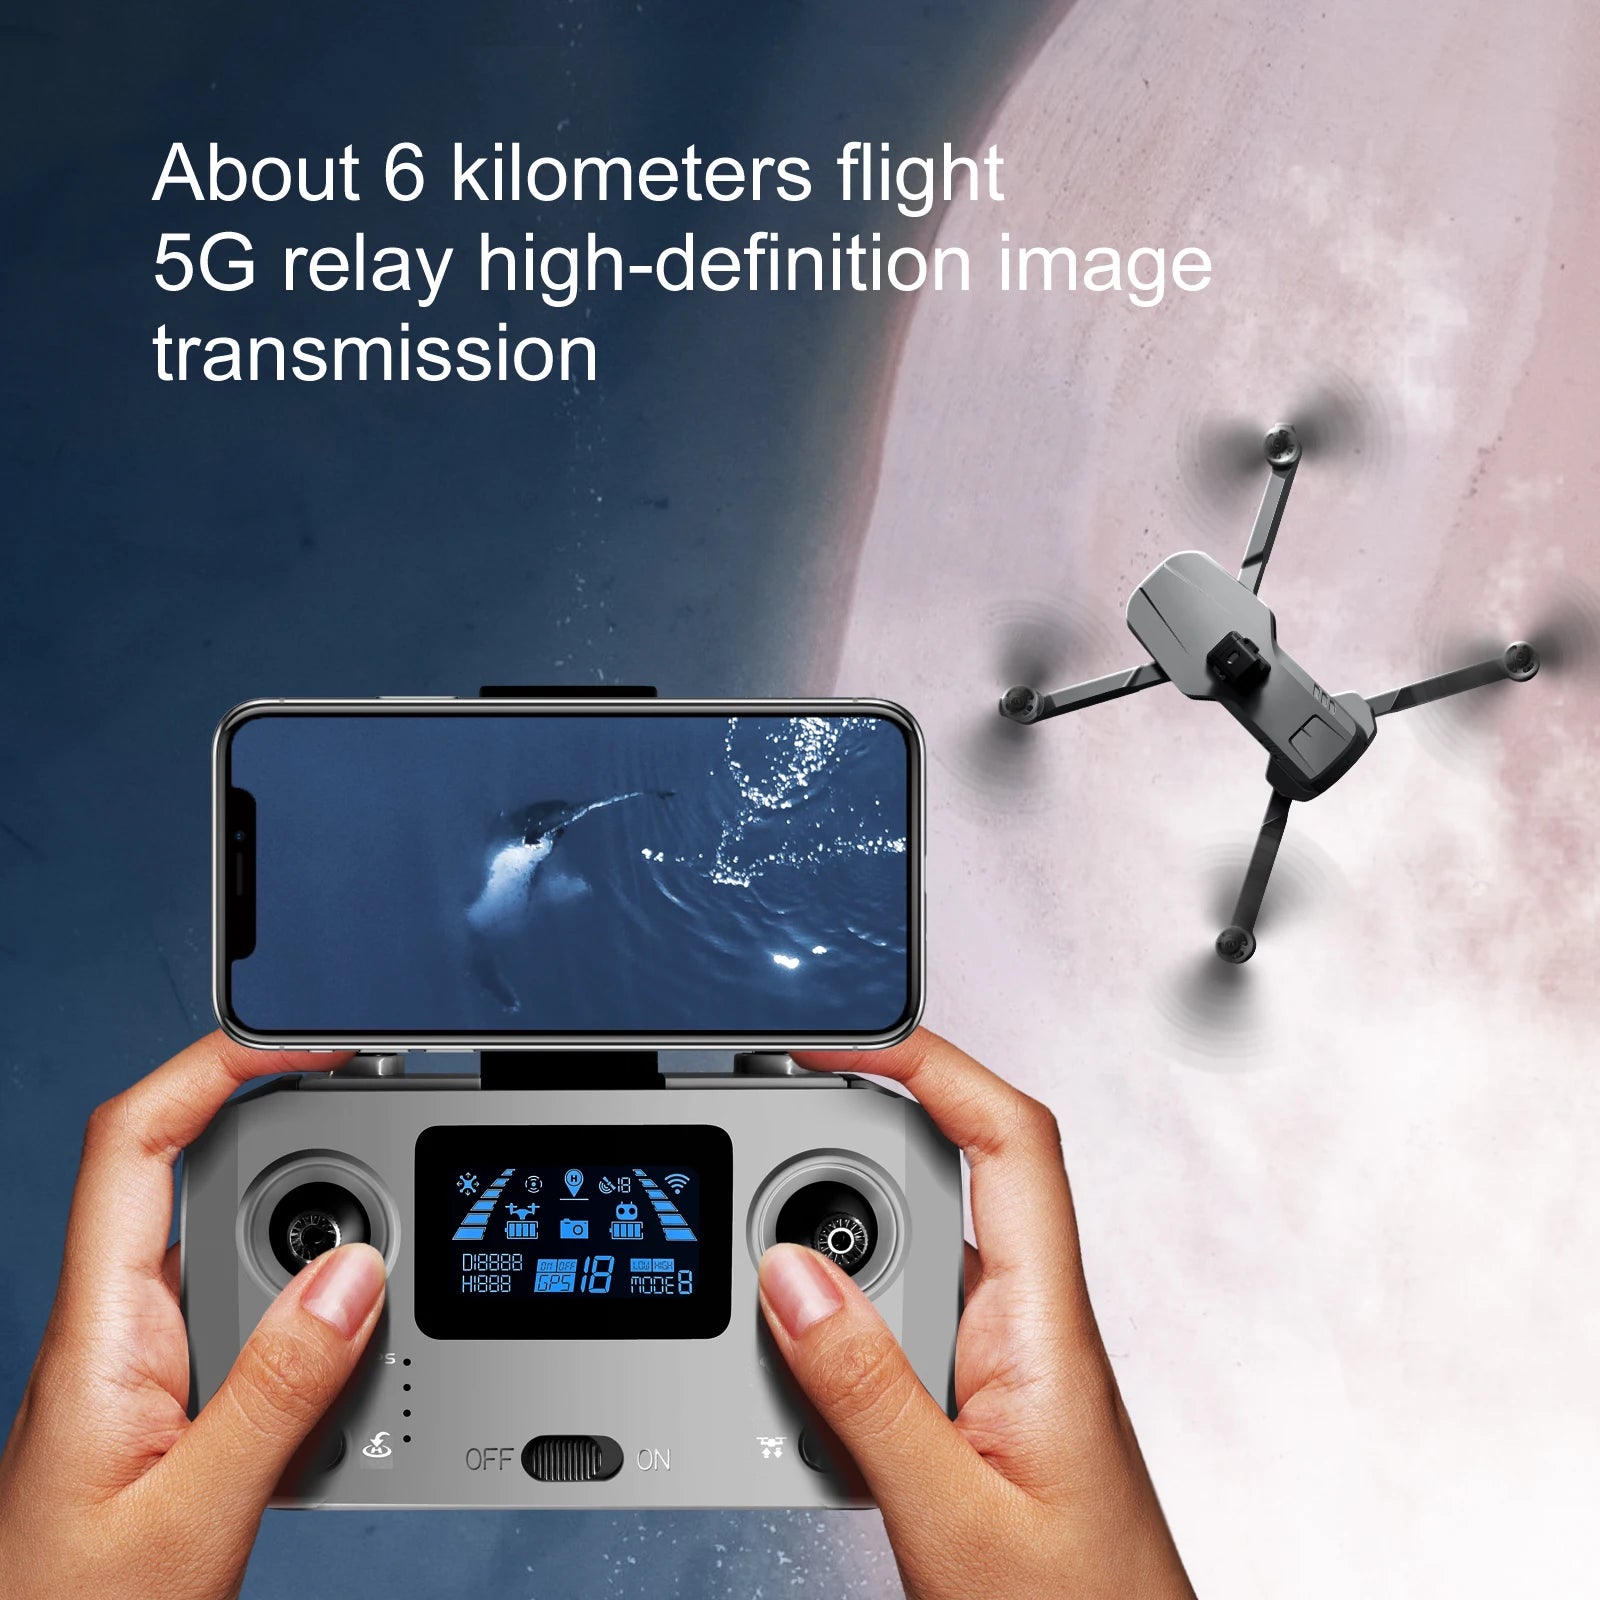 S155 Pro GPS Drone, 5G relay high-definition image transmission 0i8888 Baa Lul